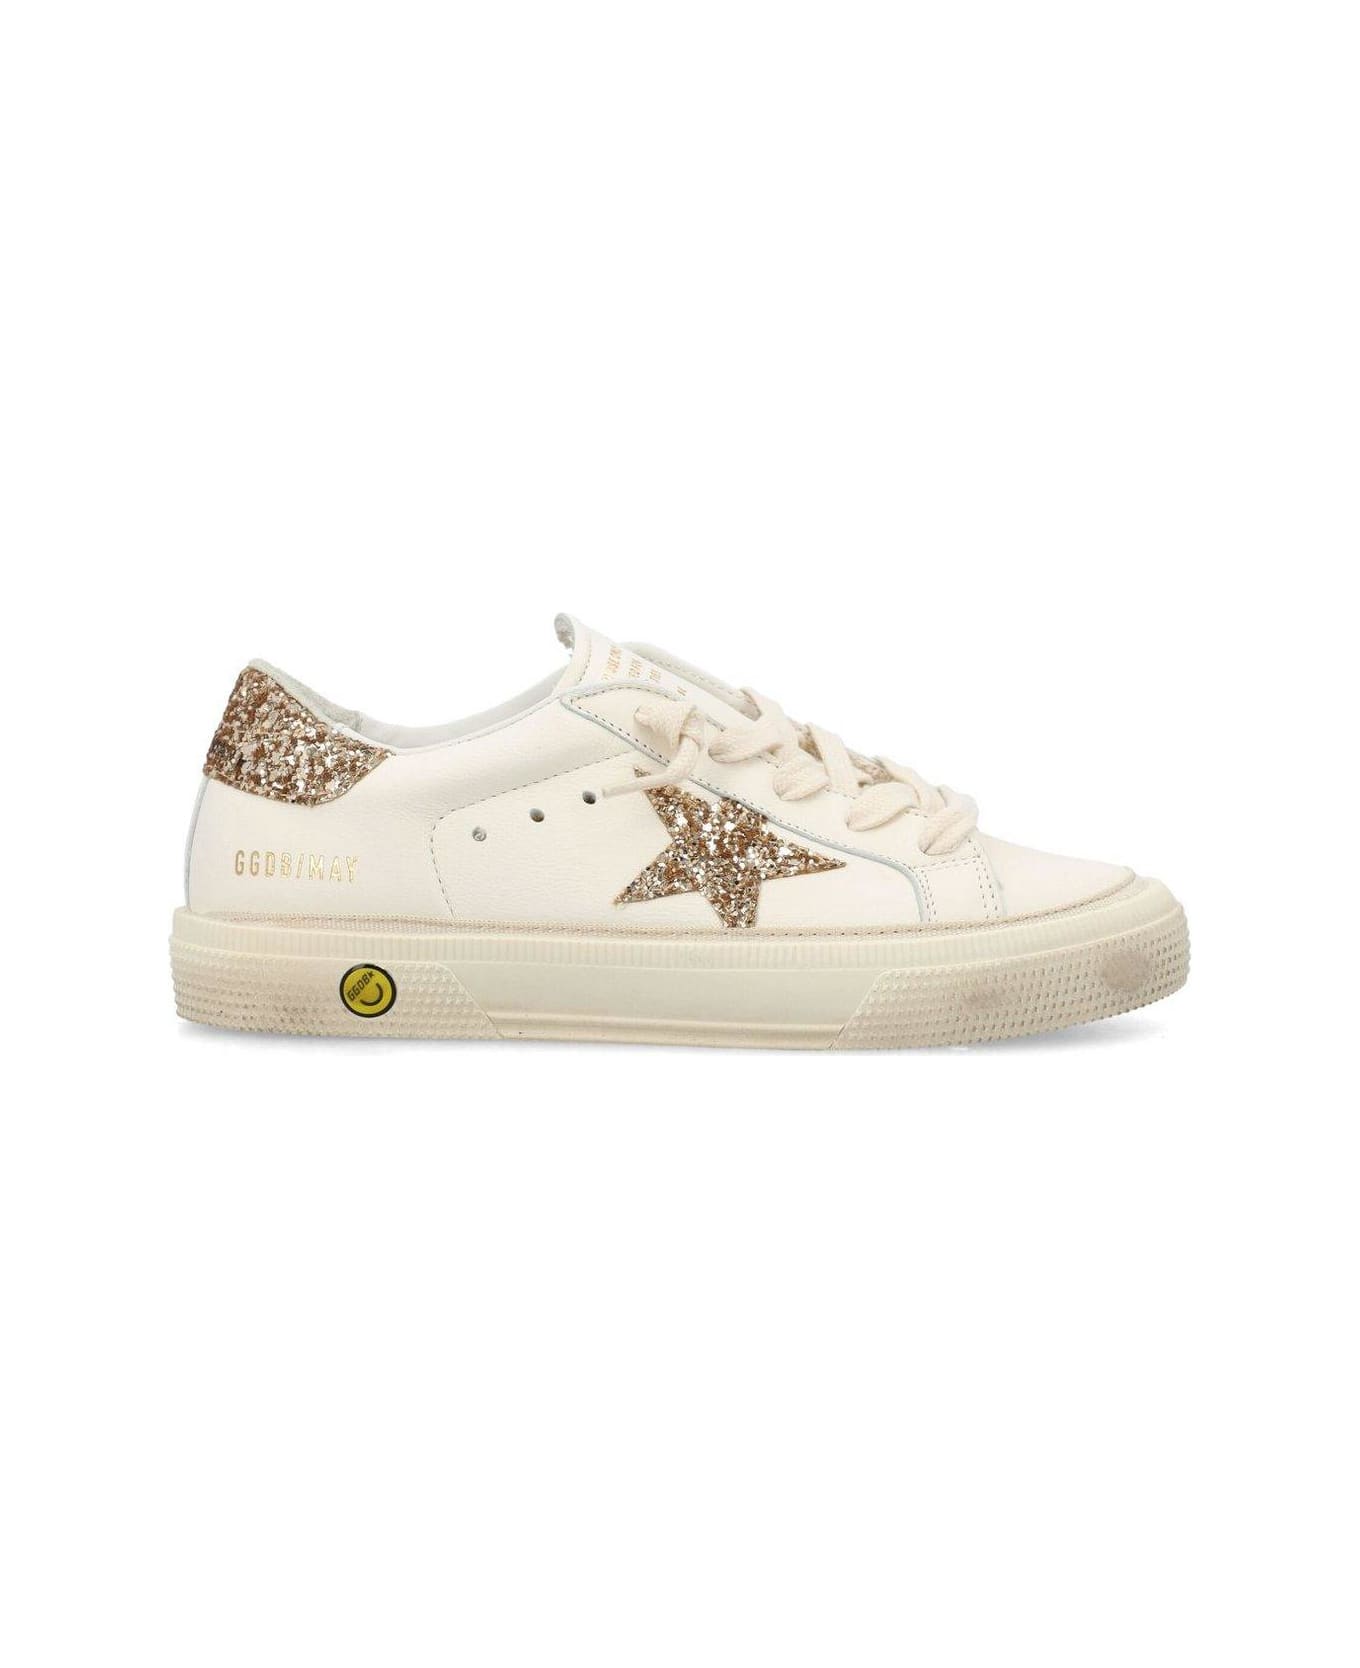 Golden Goose May Star Distressed Low-top Sneakers - White/gold